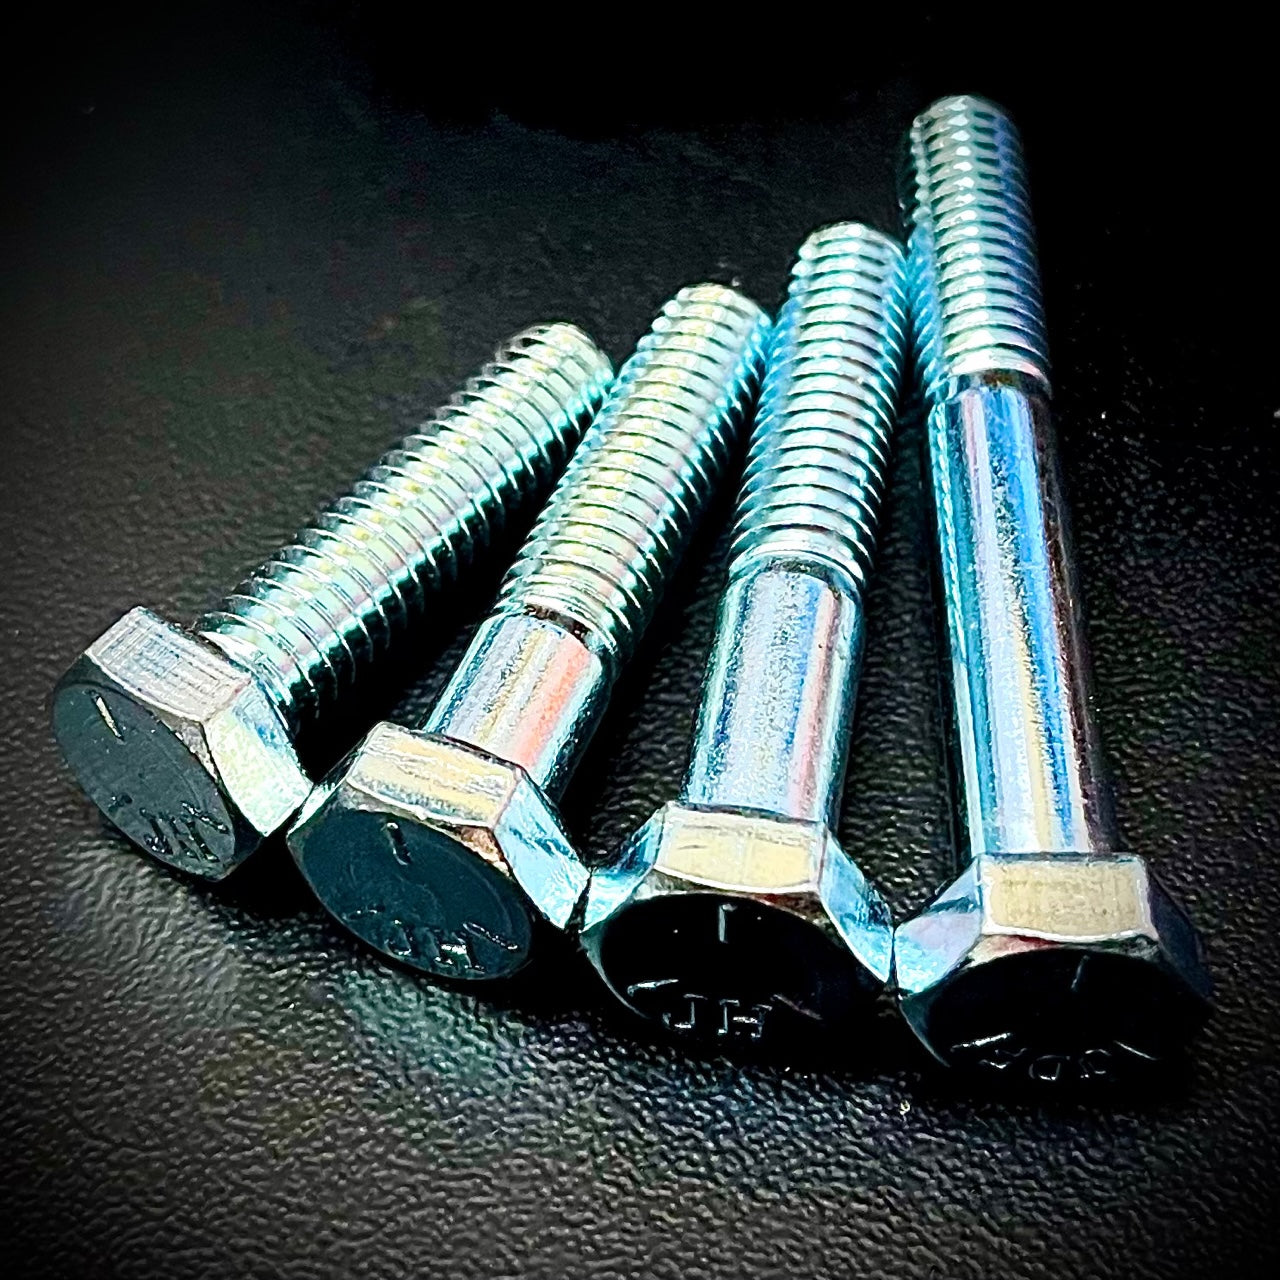 UNC 1/4" Hex Bolt and Set Screws High Tensile 8.8 Zinc DIN931 - Fixaball Ltd. Fixings and Fasteners UK